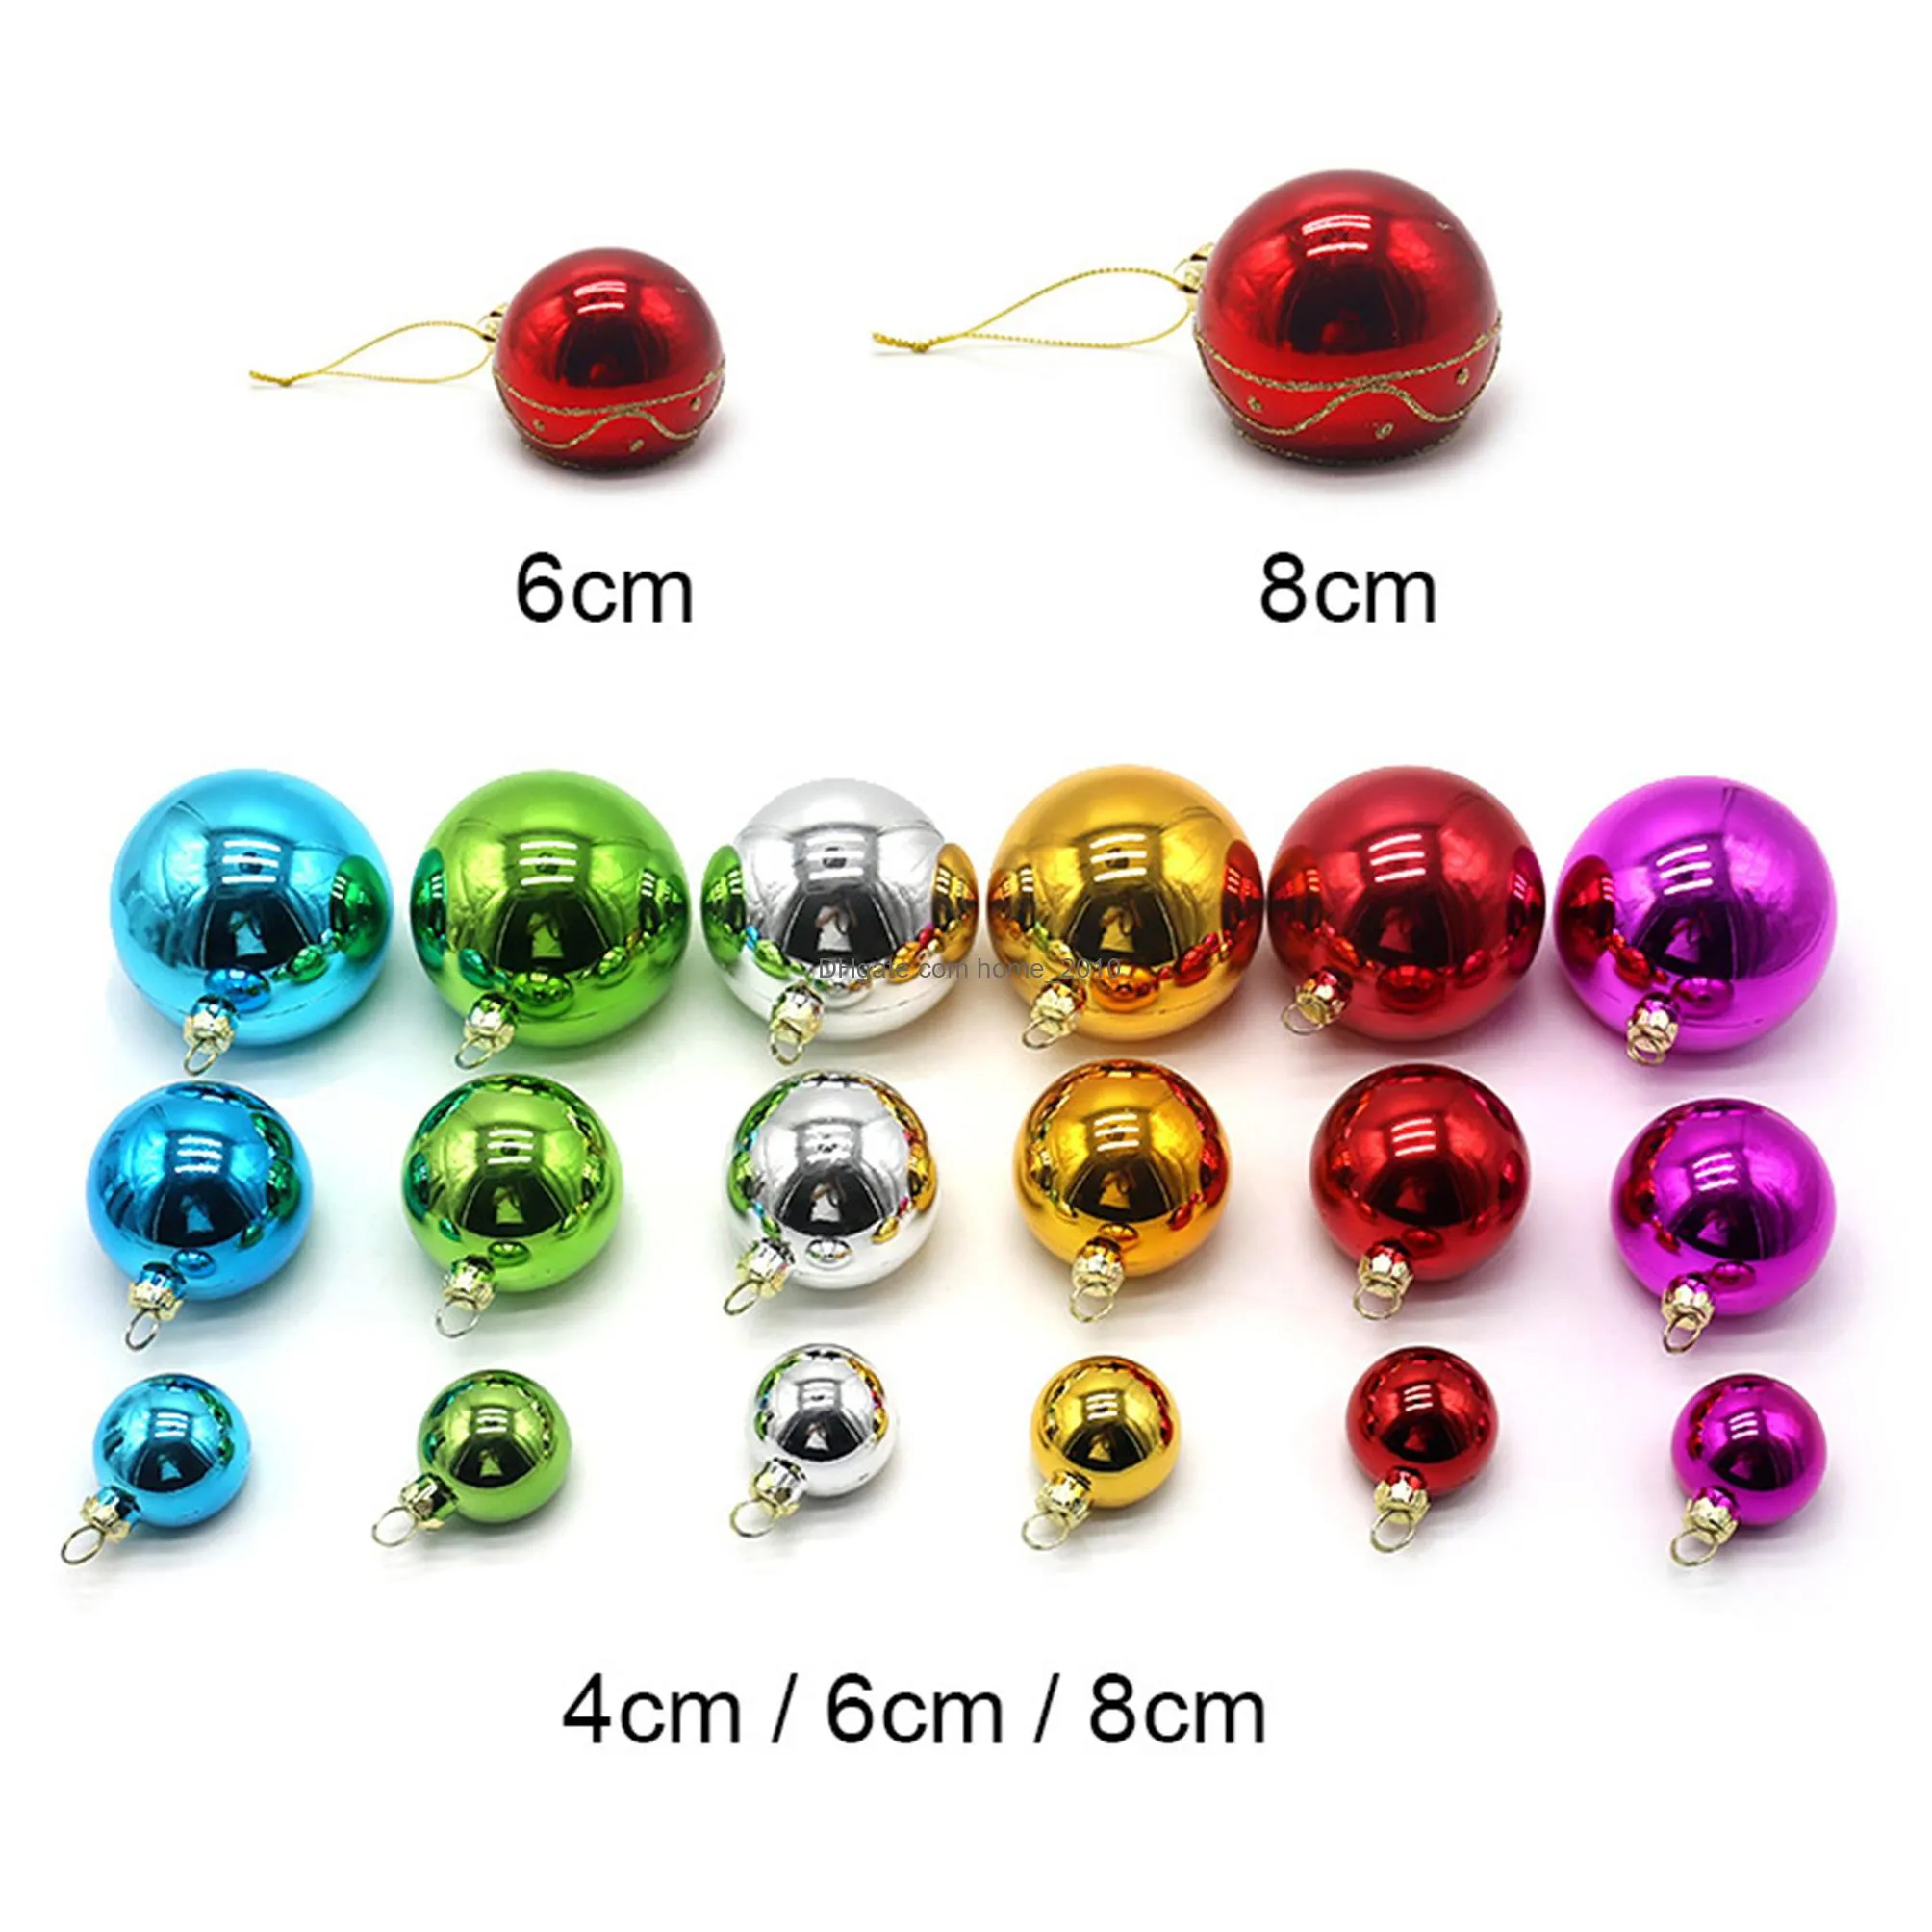 decorations sublimation should be heat transfer blank 6color 8cm round plastic christmases ball ornaments christmass tree ornaments inventory